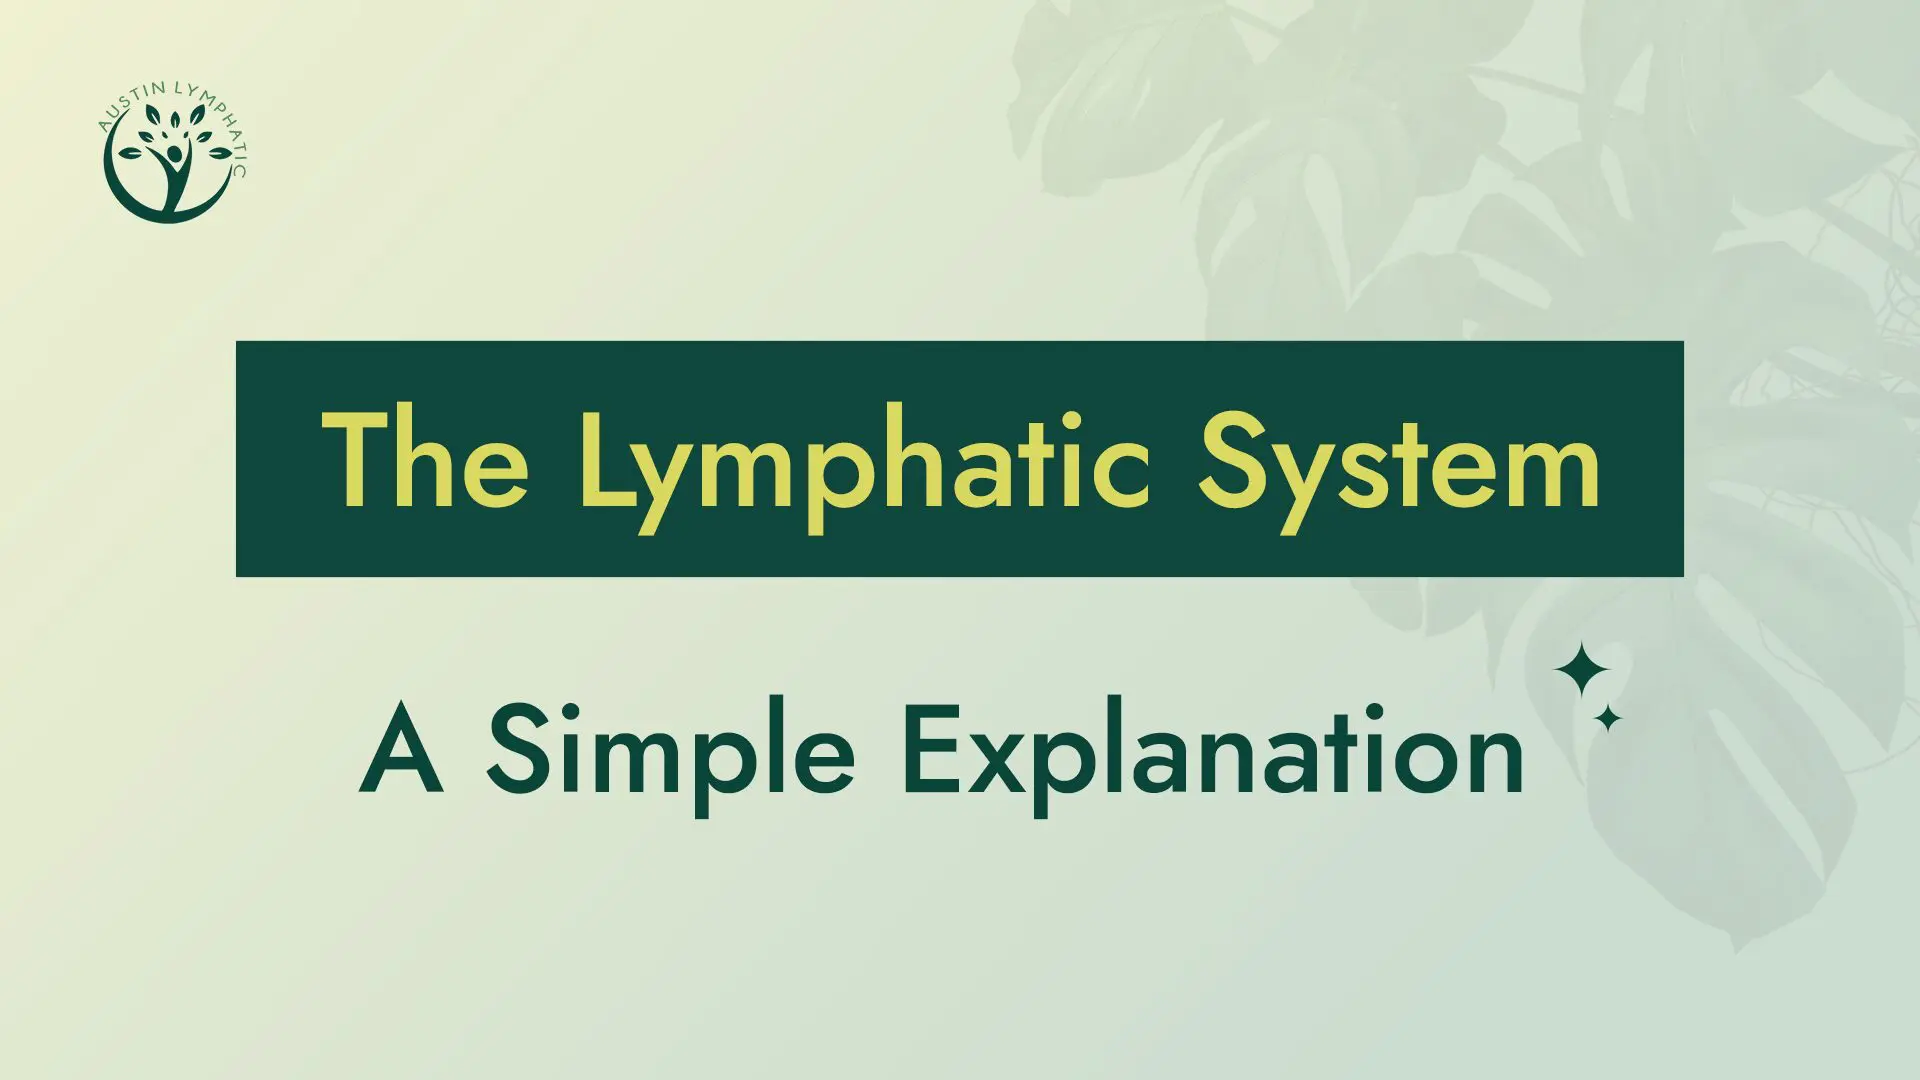 A Simple Explanation of the Lymphatic System